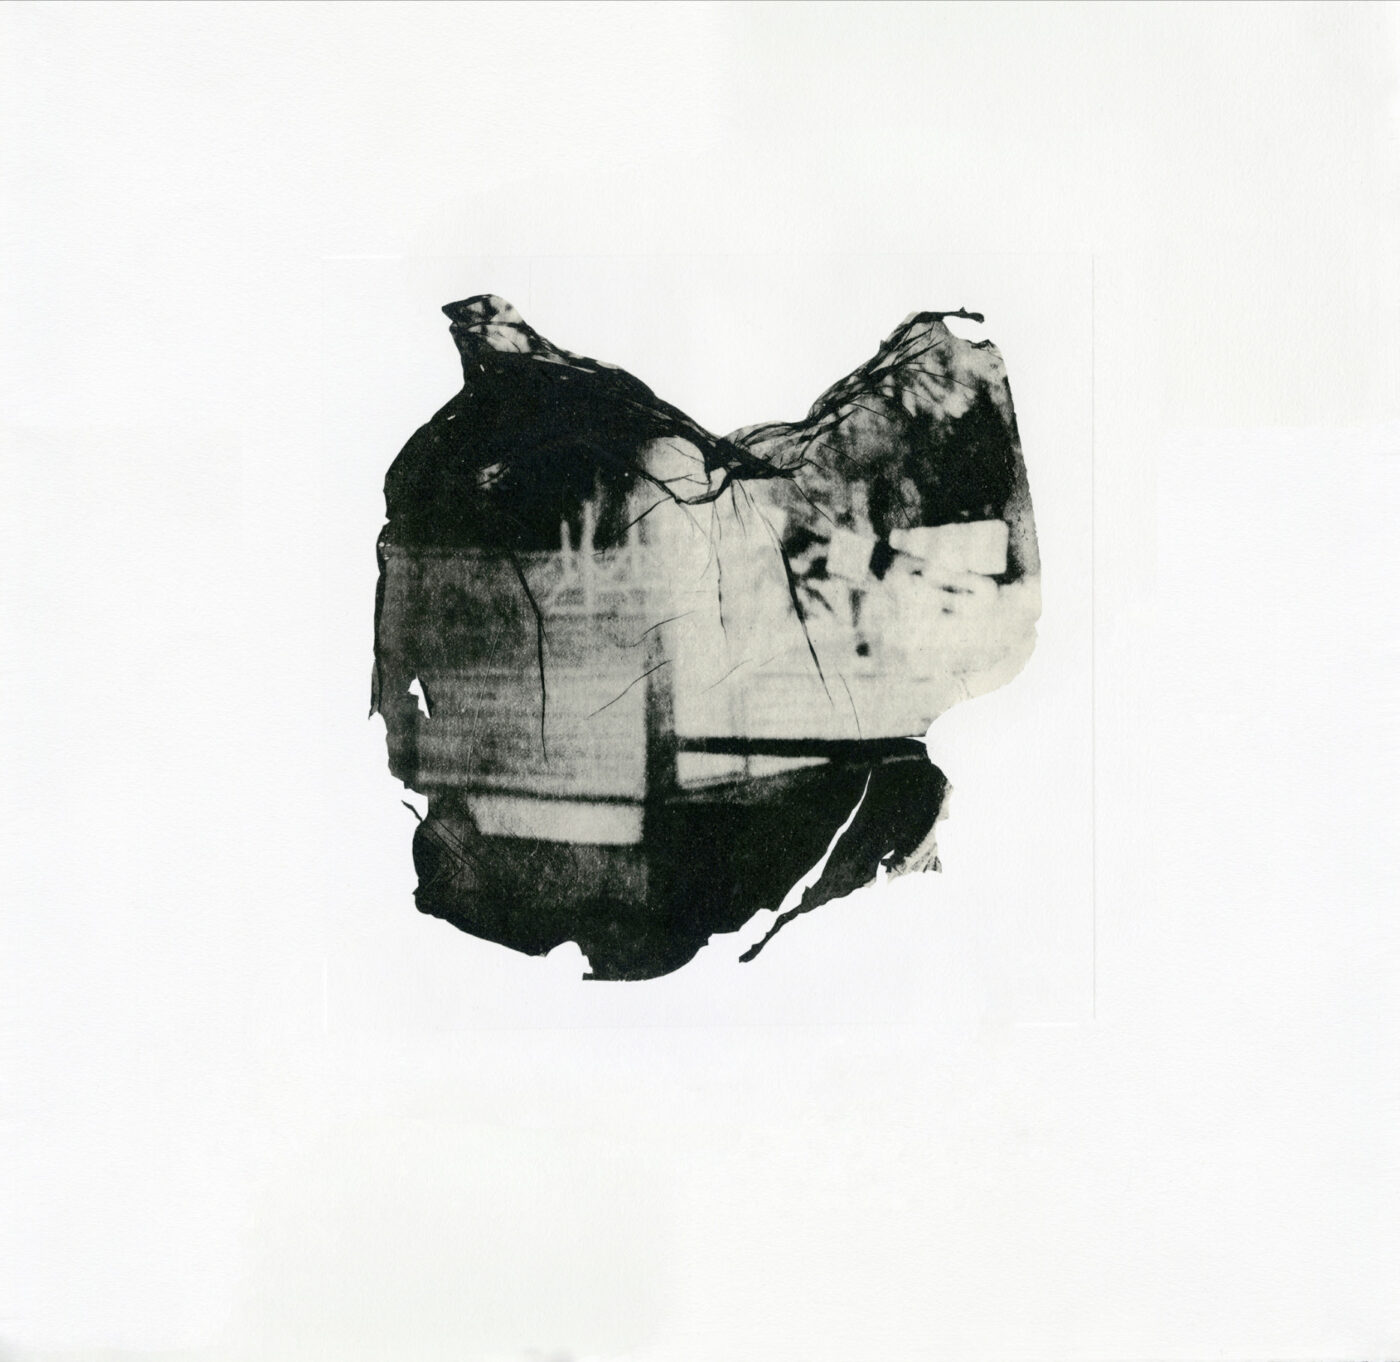 A black and white photopolymer print in an abstract shape